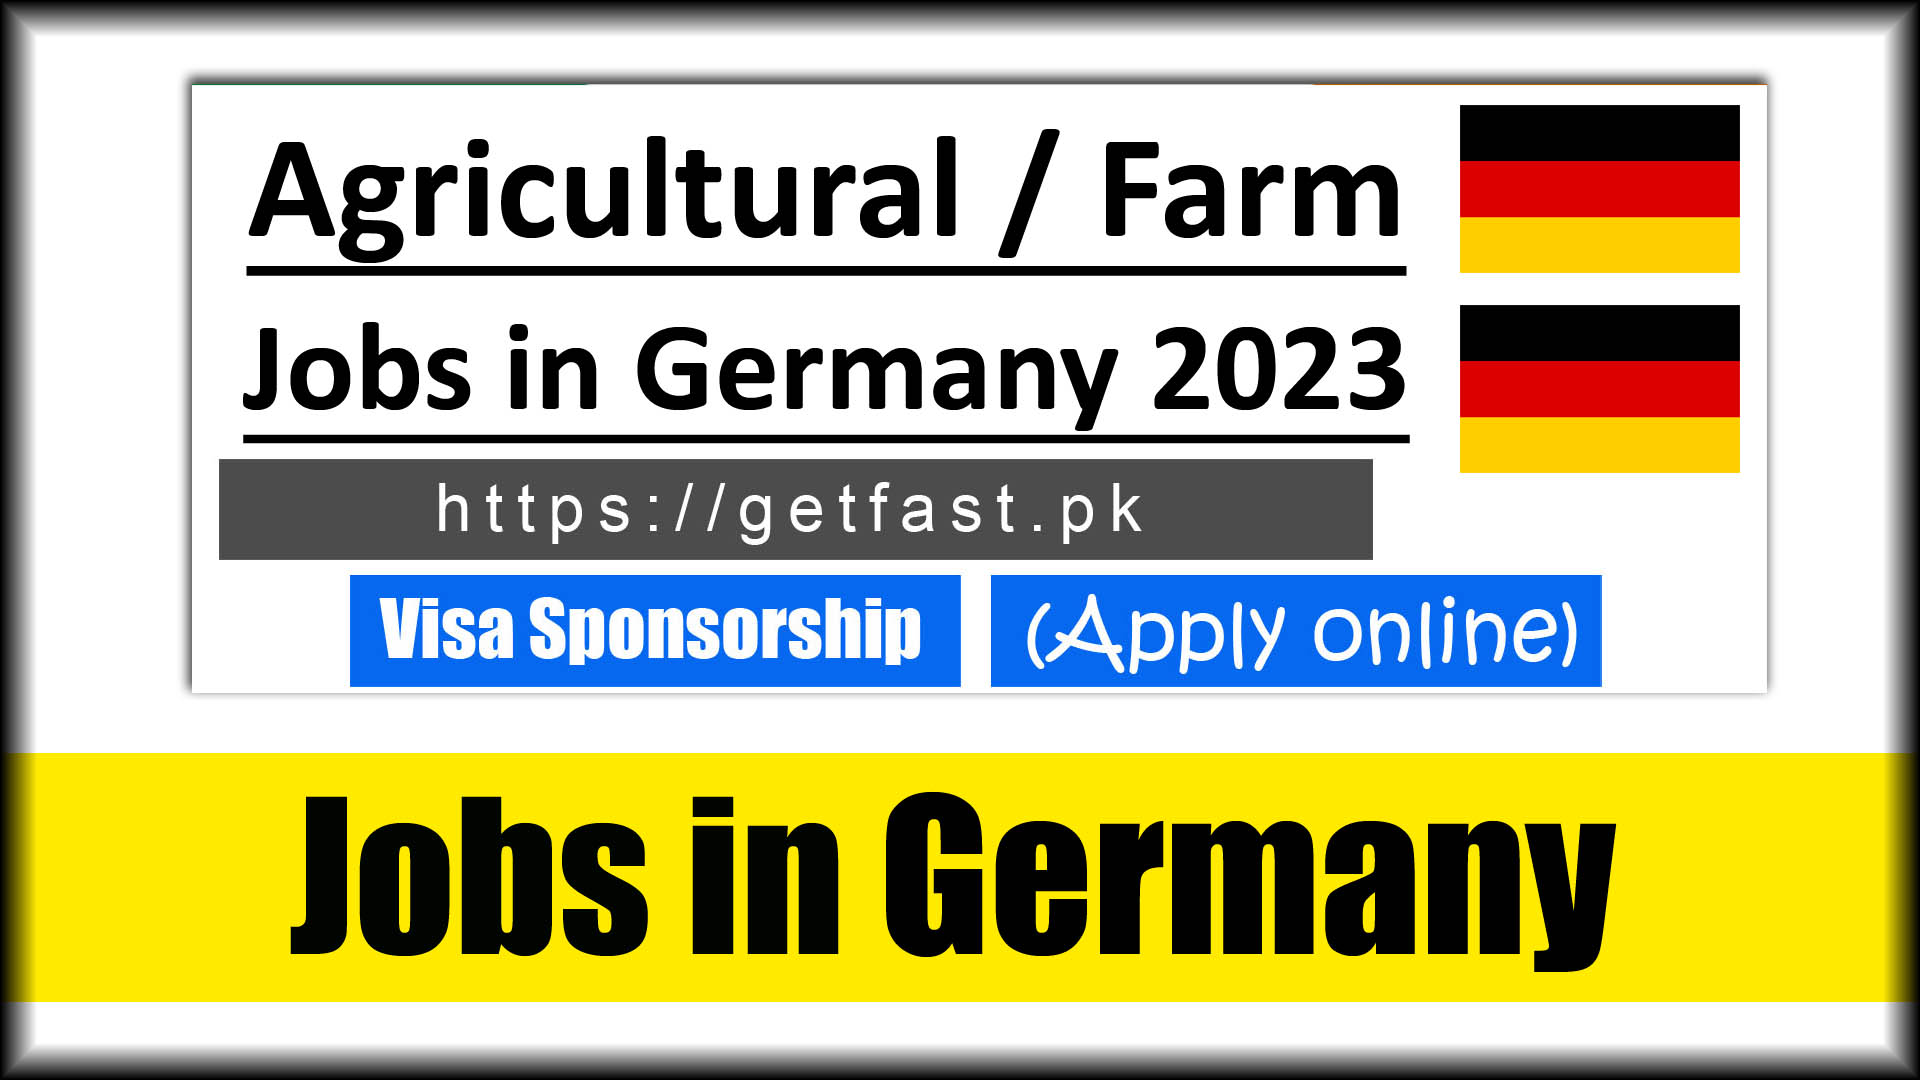 Agricultural / Farm Jobs in Germany 2023 with Visa Sponsorship - Apply Online